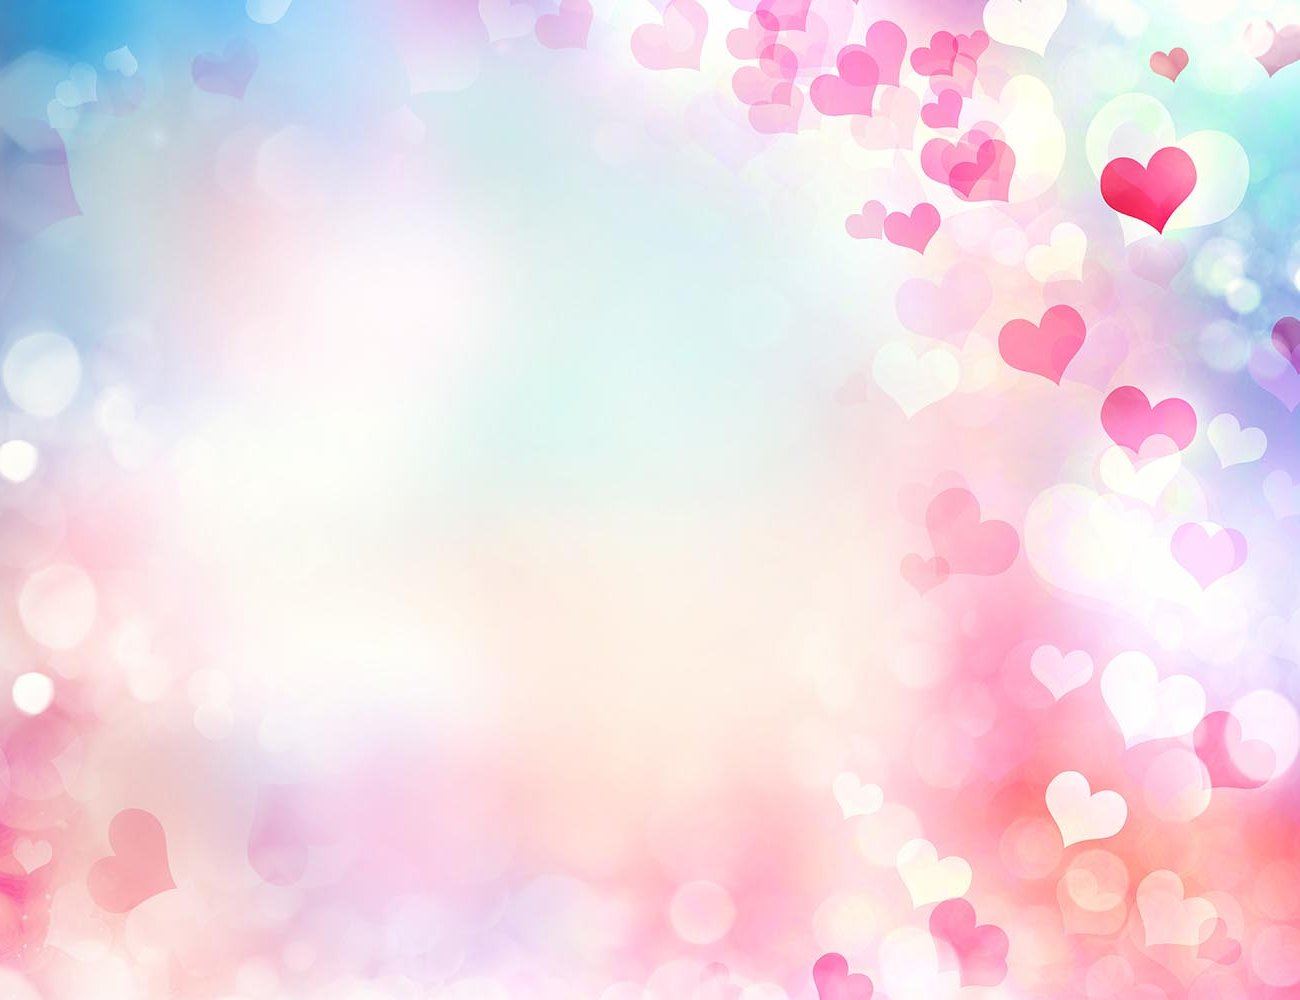 Bokeh Background With Pink And Red Heart Around Sides Photography Shopbackdrop